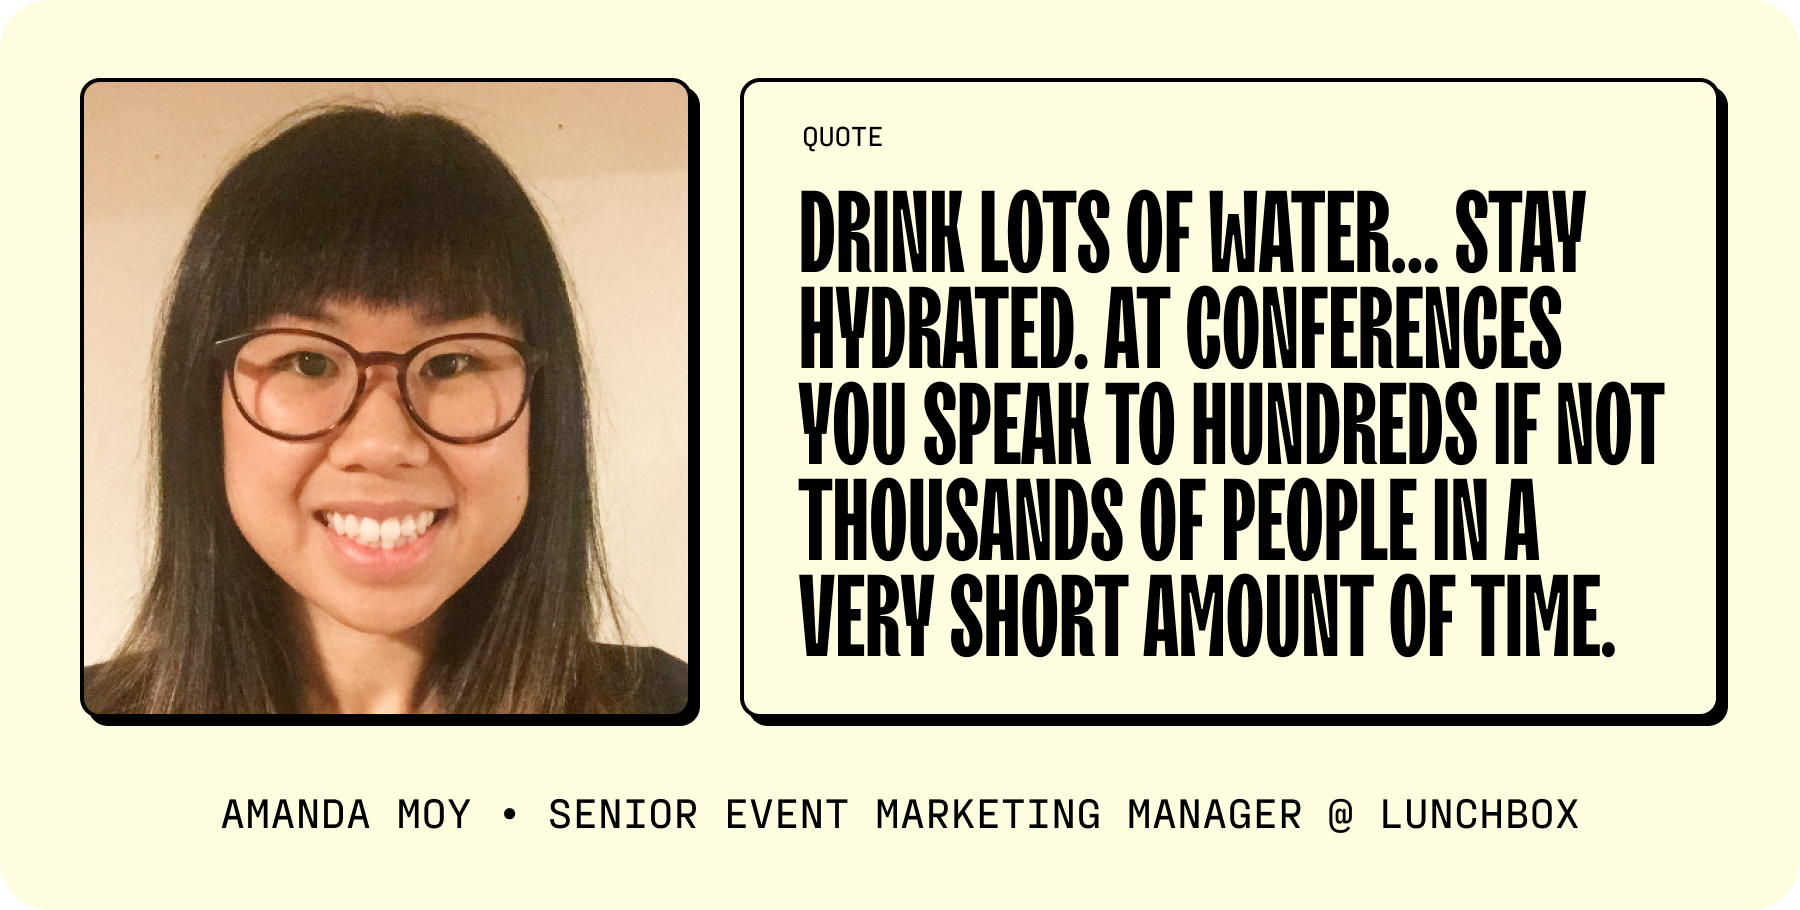 And while you’re at it, “drink lots of water” advises Amanda Moy, Senior Event Marketing Manager at Lunchbox. “Stay hydrated. At conferences you speak to hundreds if not thousands of people in a very short amount of time.” 